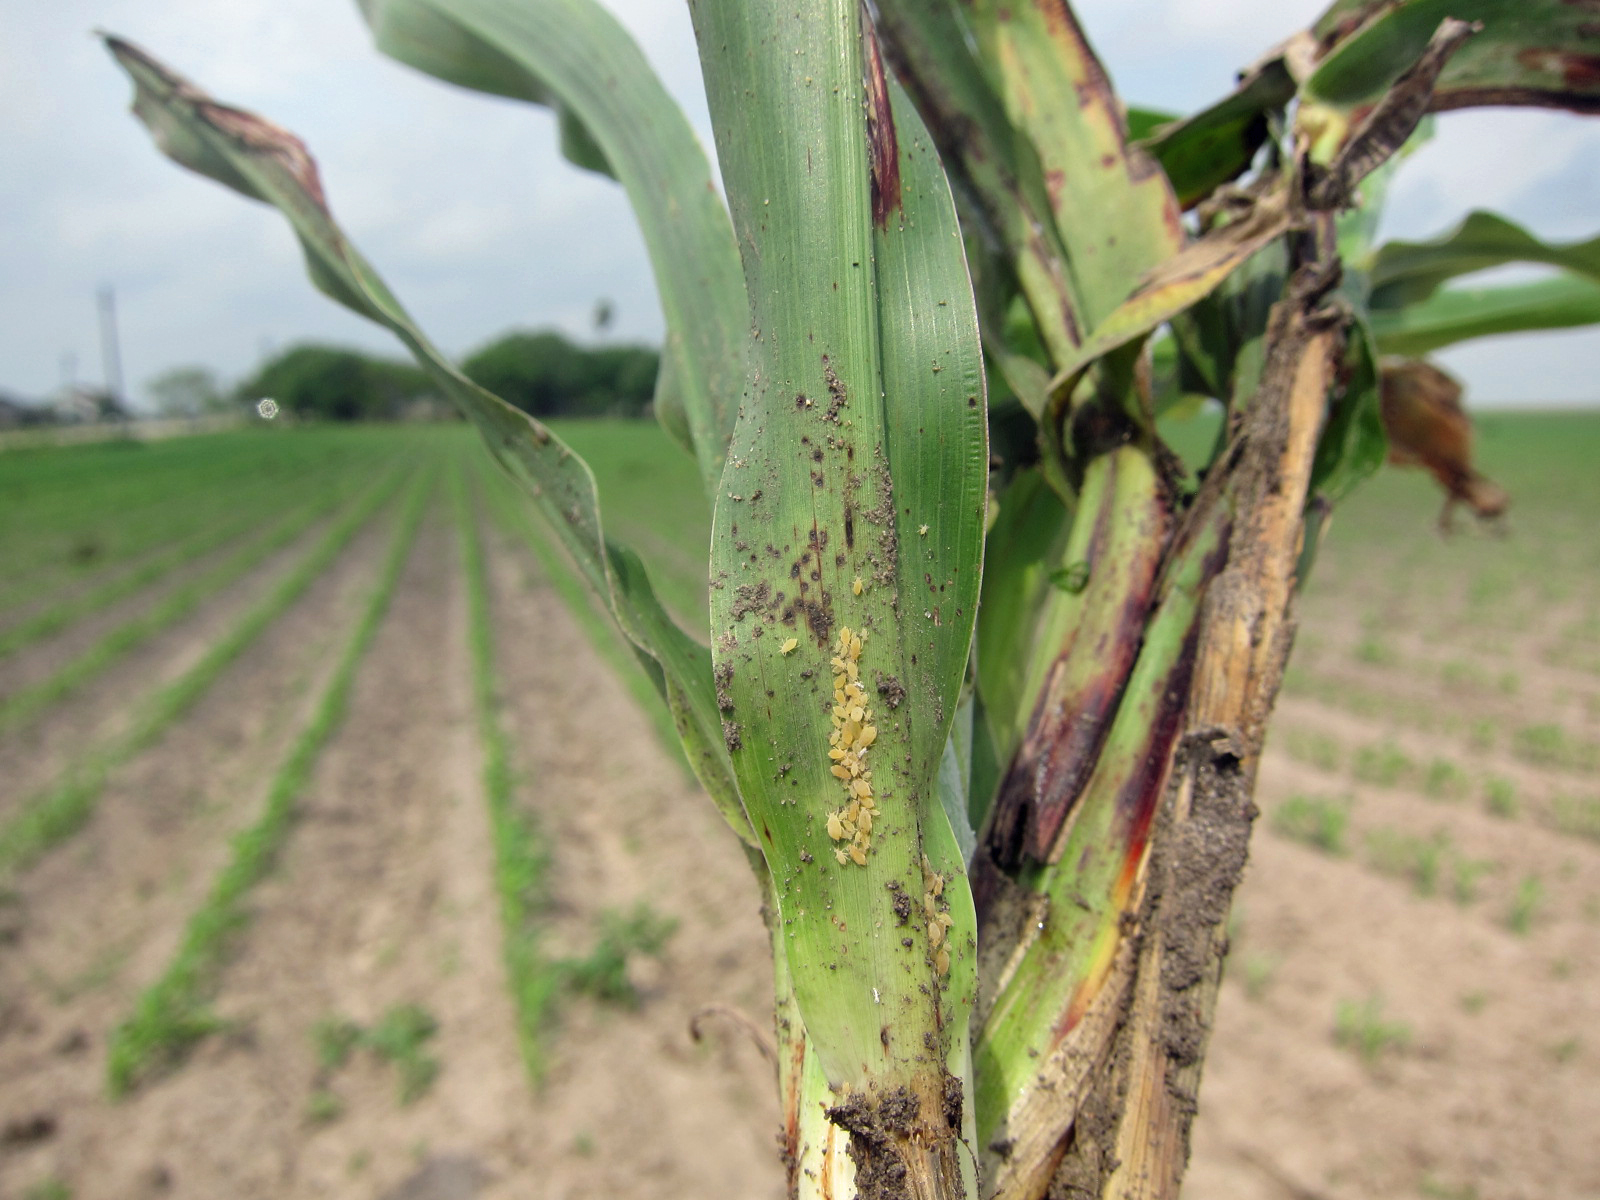 Sugarcane aphids and sorghum